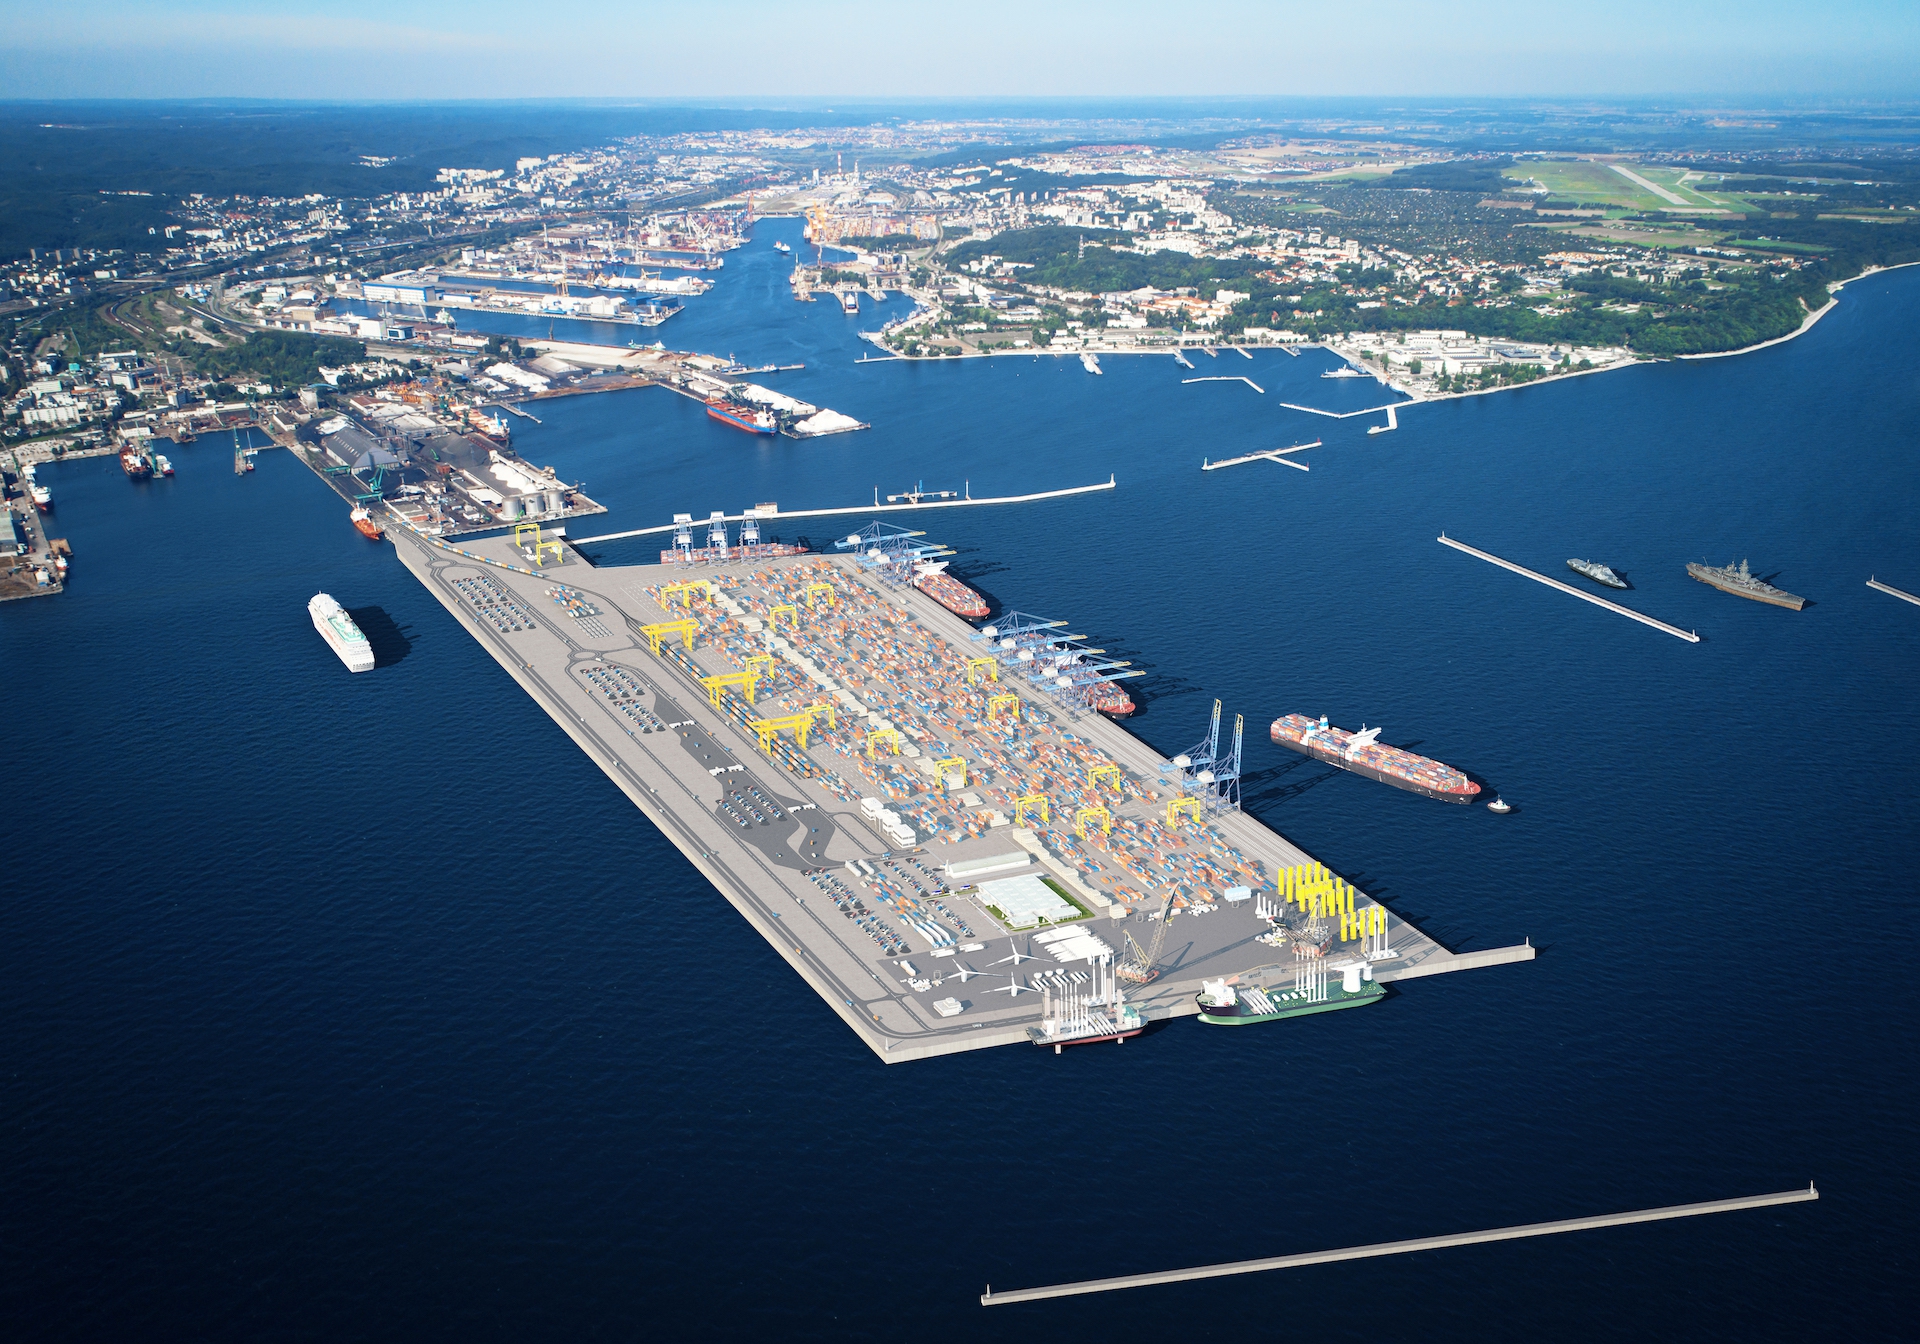 The whole world eyes set on the Port of Gdynia – offers opened for a private partner for the Outer Port investment - MarinePoland.com